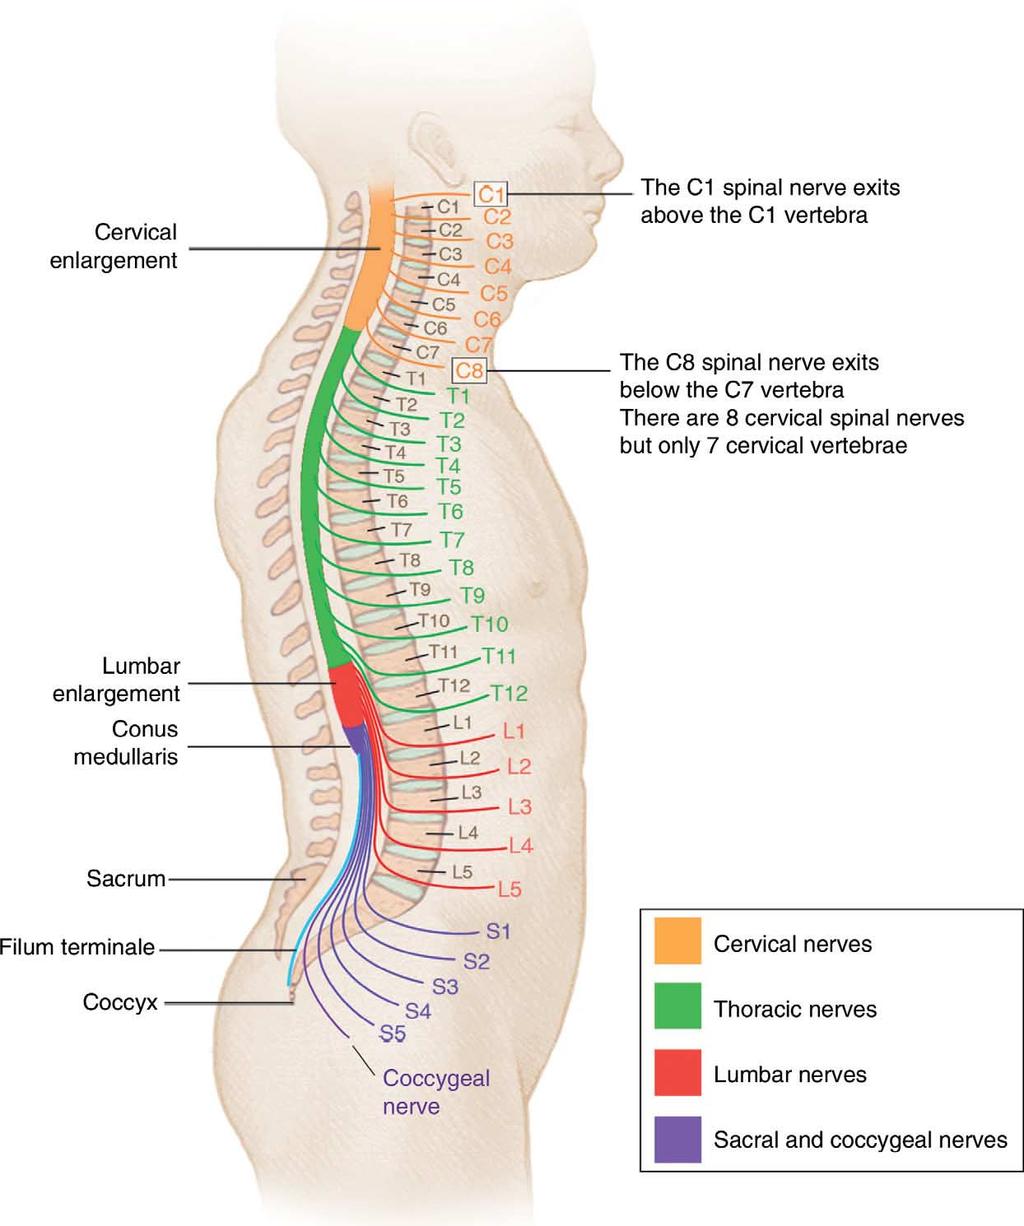 6 Figure 1.2. Sagittal view of the vertebral (spinal) canal showing the various segments of the spinal cord and spinal nerves which exit through the intervertebral foramina.